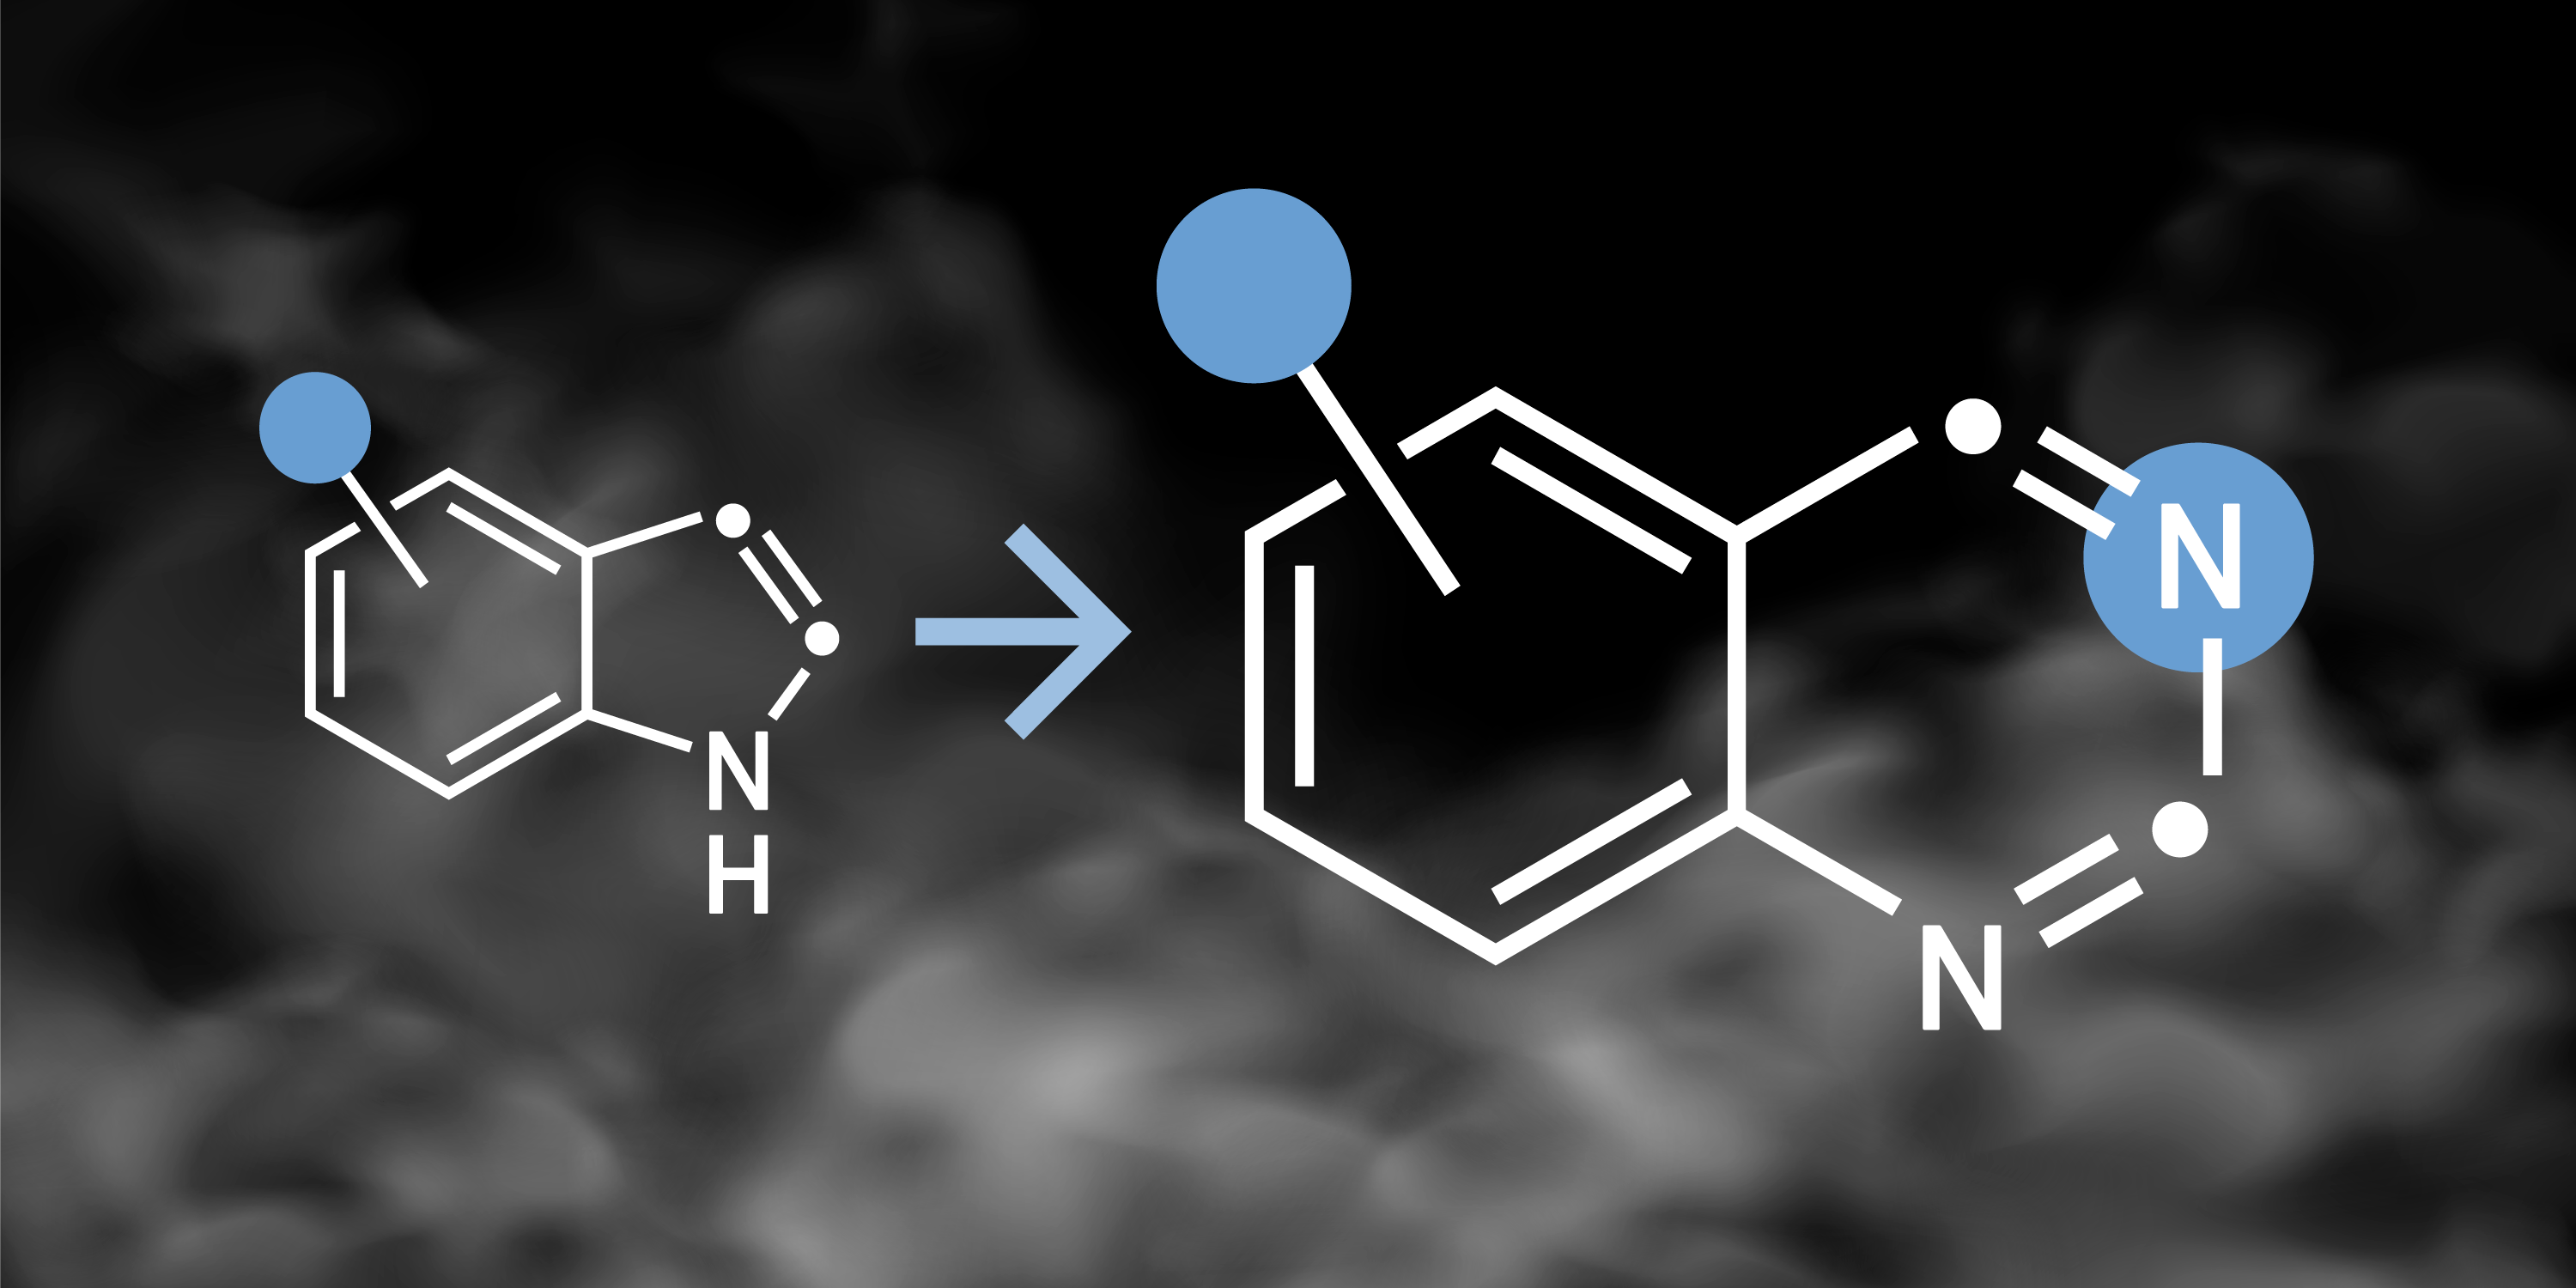 Two chemical compounds, on the left: Indol